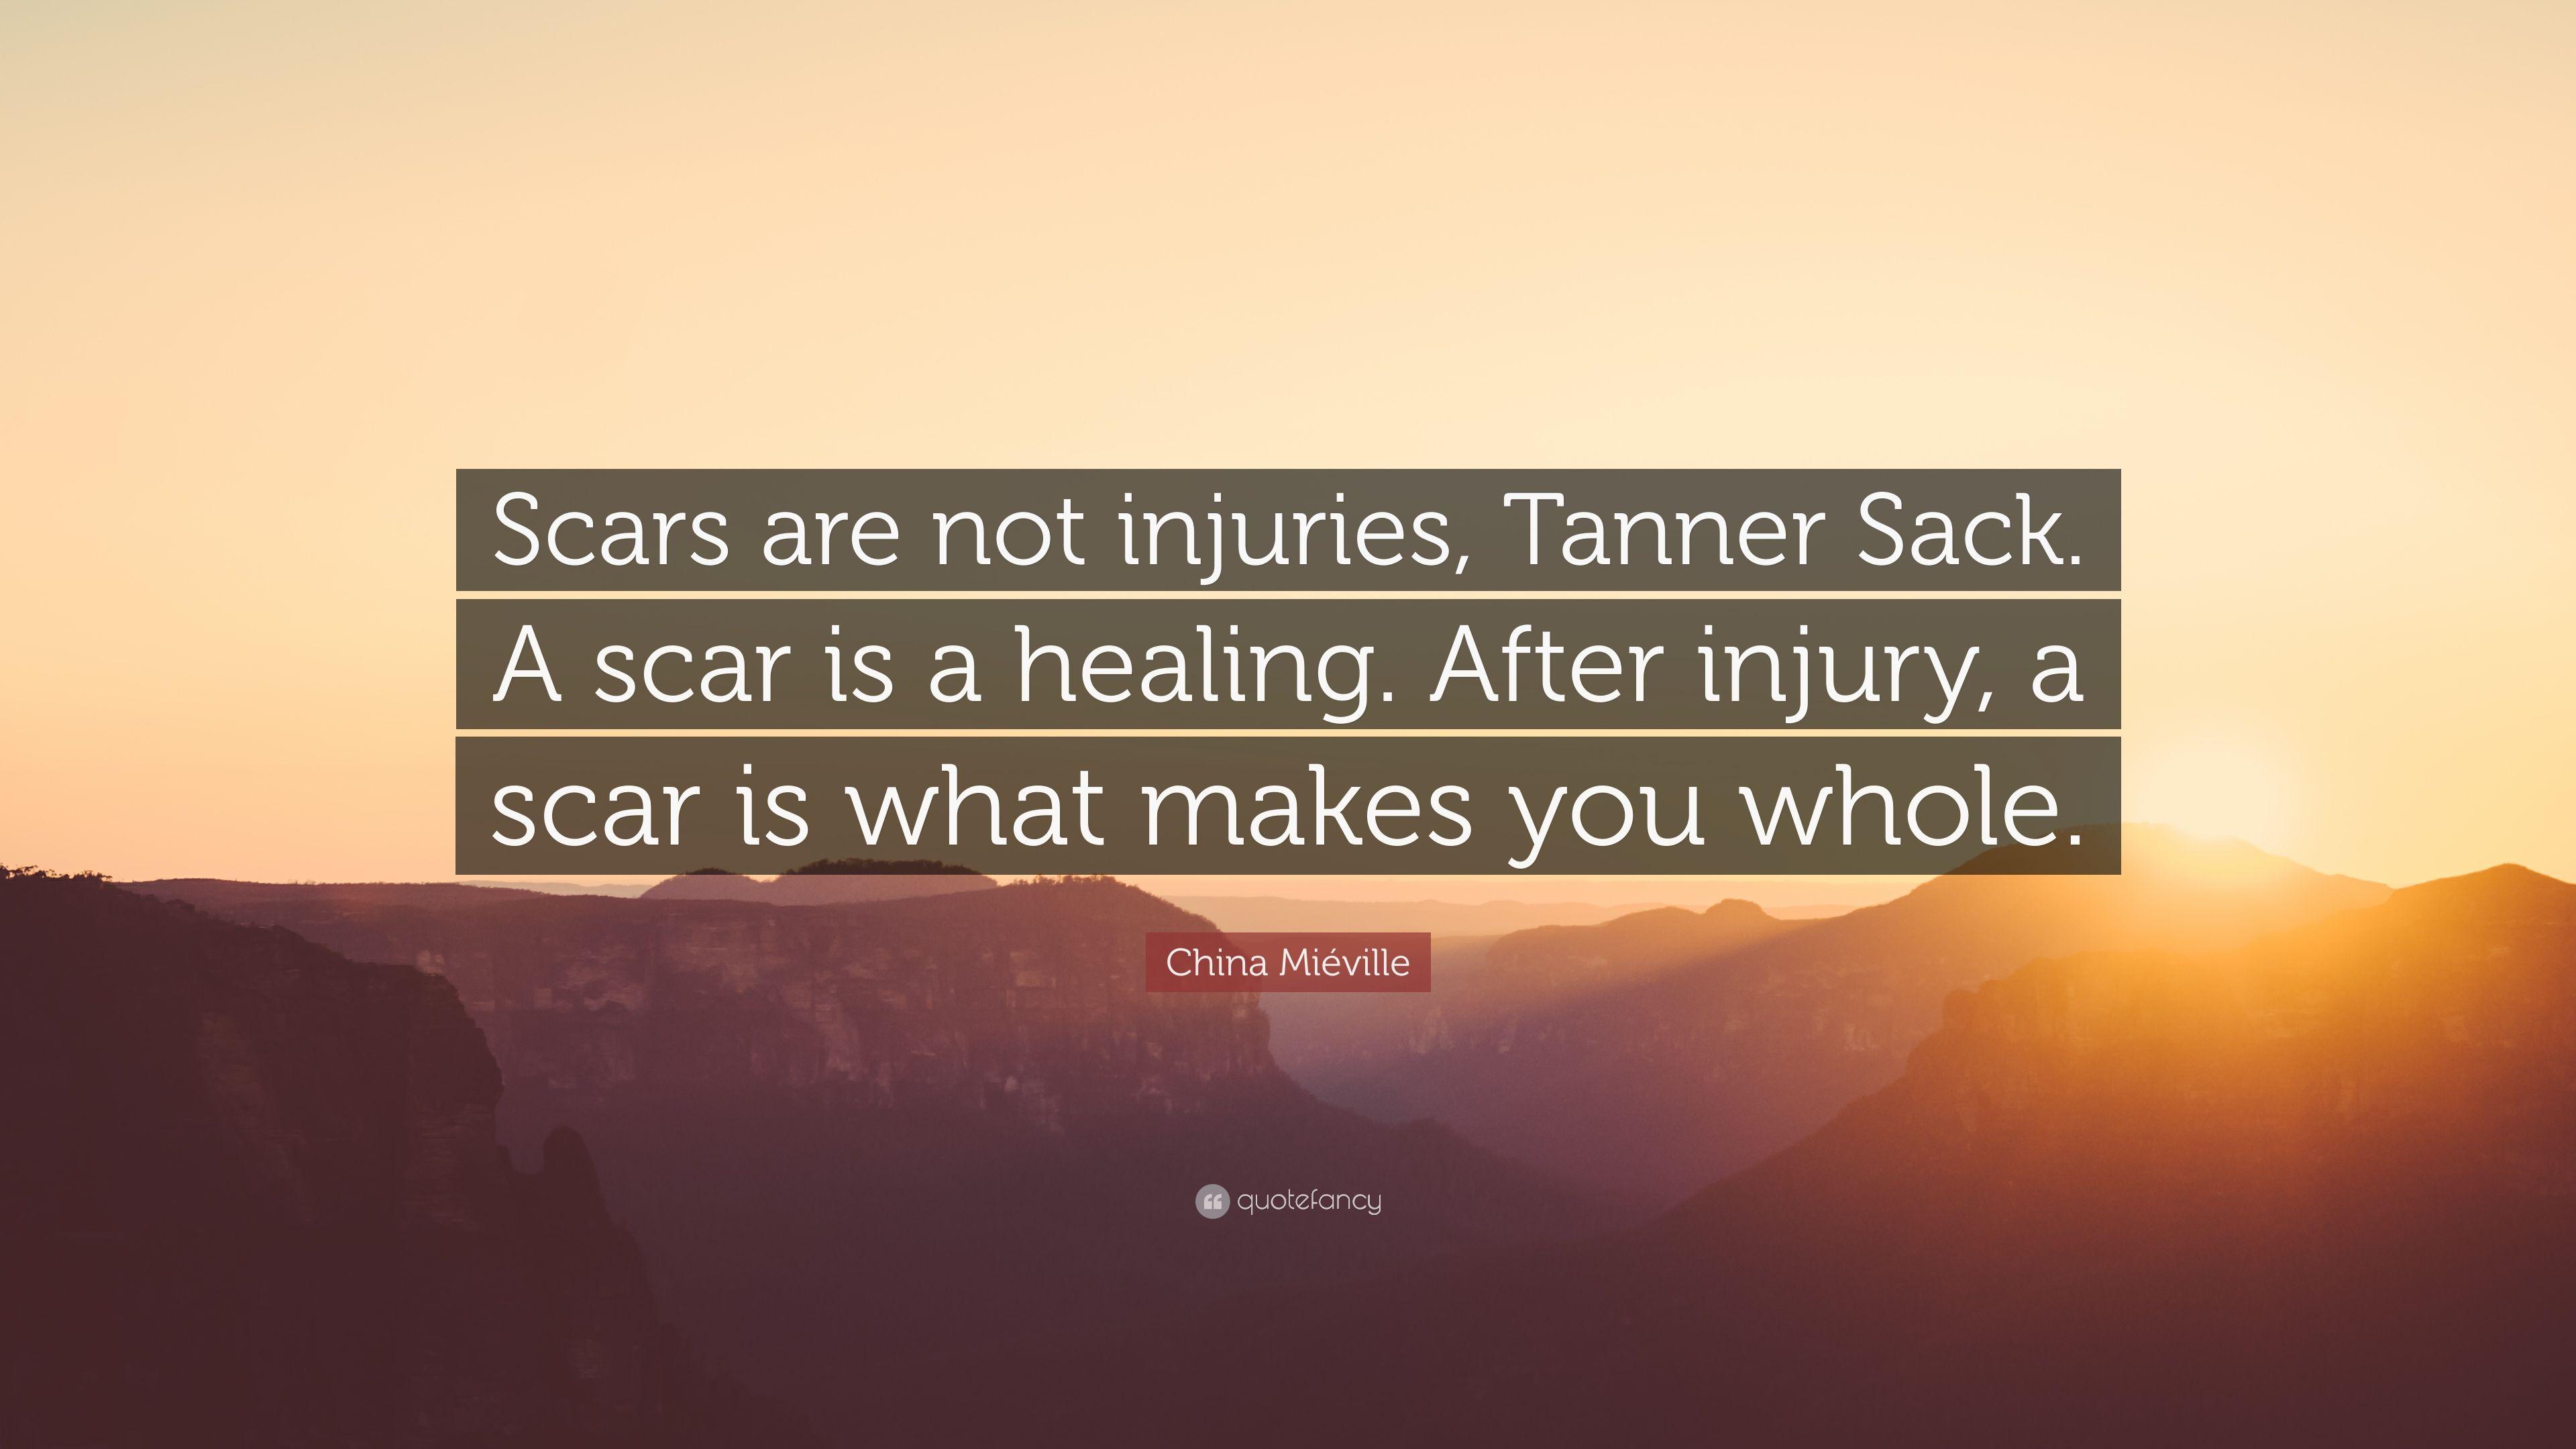 China Miéville Quote: “Scars are not injuries, Tanner Sack. A scar